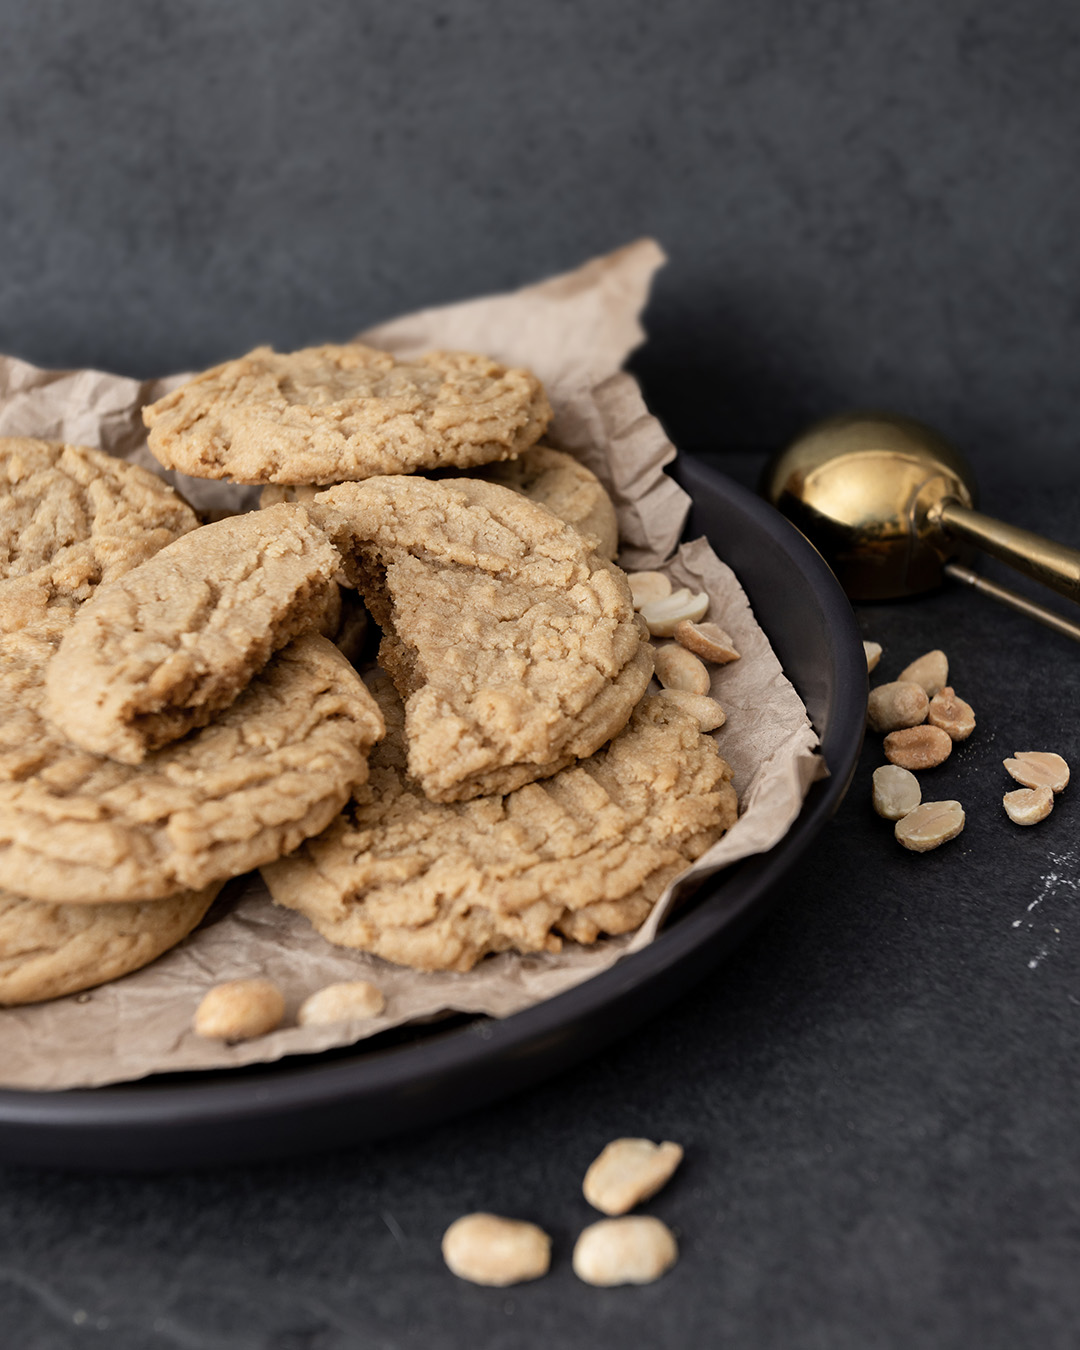 These cookies are surprisingly amazing, even if you're not typically a huge fan of most peanut butter cookies. These soft and chewy peanut butter cookies are definitely a must-try!